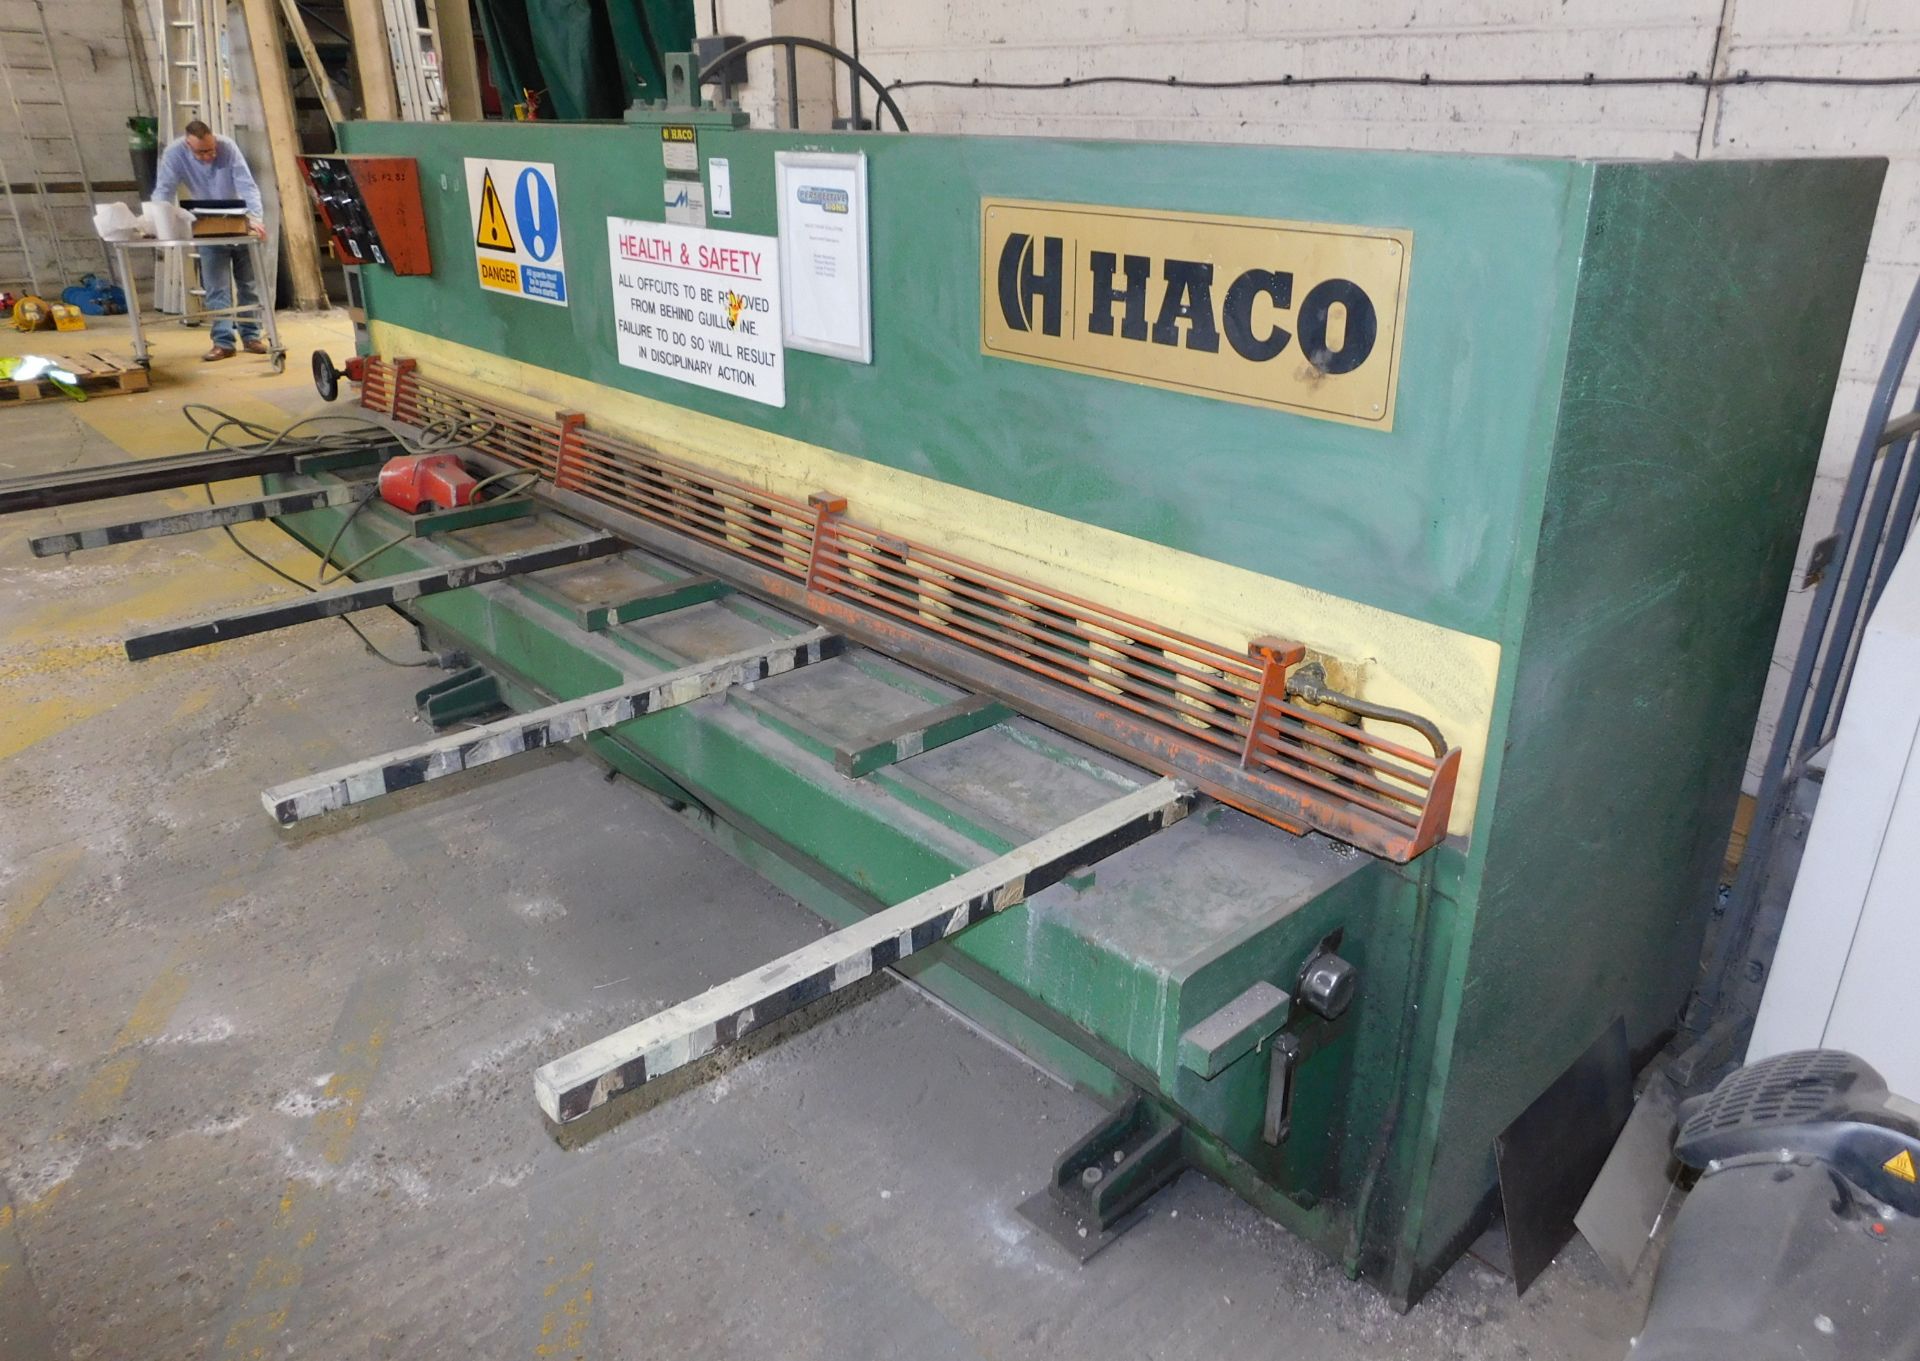 Haco TS306 Hydraulic Guillotine, Capacity 3050mm X 6mm, s/n 801527 - Image 2 of 4